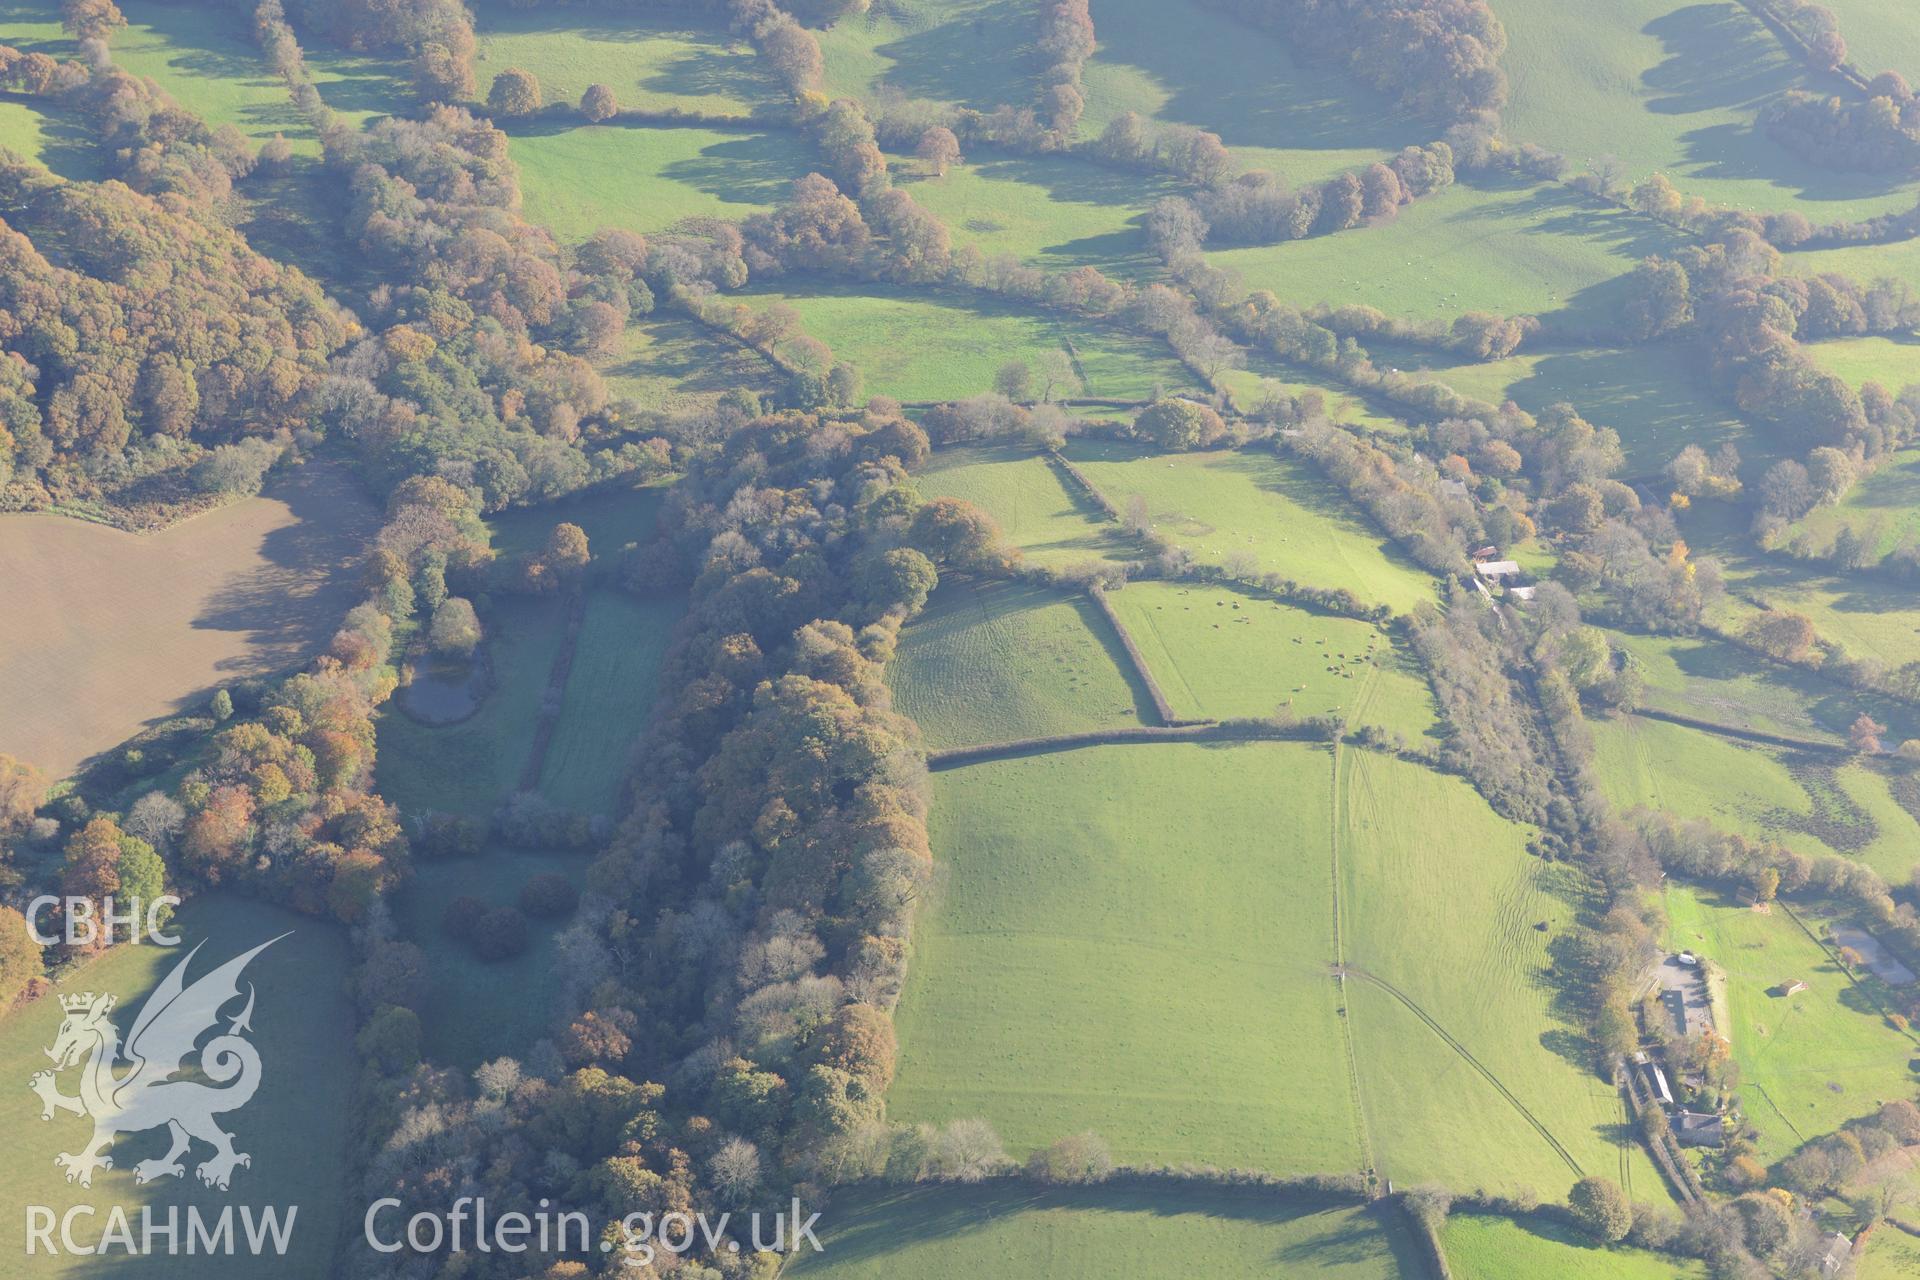 Bronfre-Ganol Hillfort, half a mile south west of Ciliau Aeron. Oblique aerial photograph taken during the Royal Commission's programme of archaeological aerial reconnaissance by Toby Driver on 2nd November 2015.